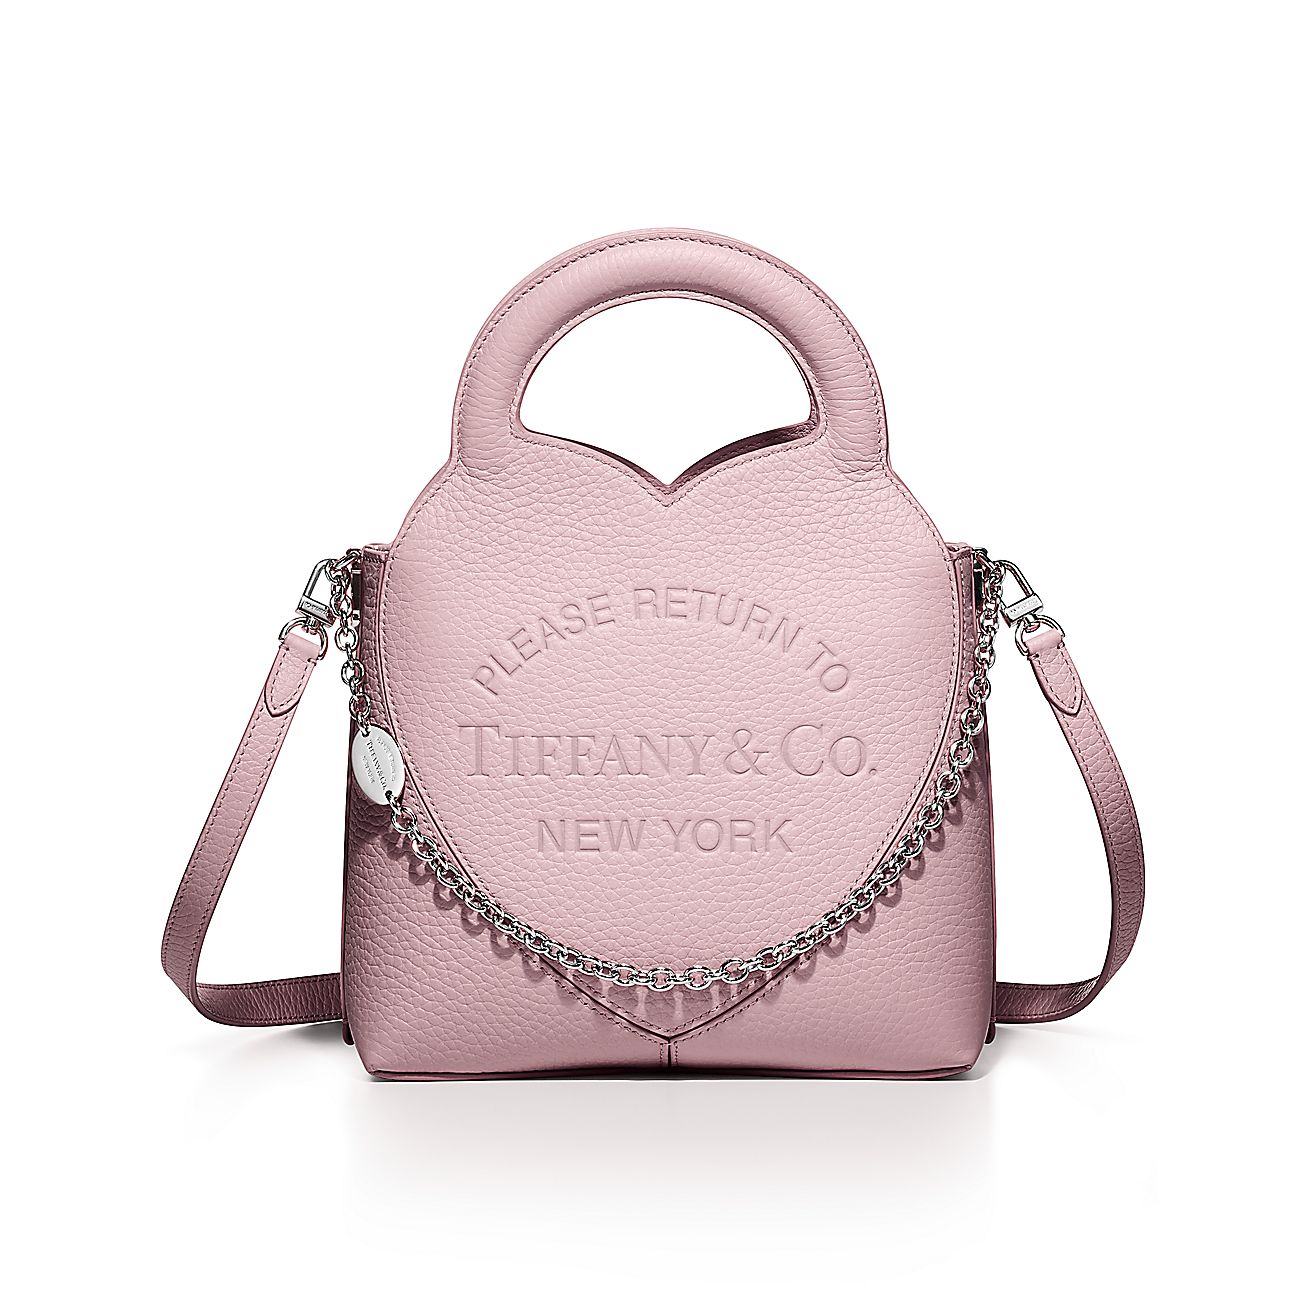 ægtemand makeup min Return to Tiffany® Mini Tote Bag in Crystal Pink Leather | Tiffany & Co.